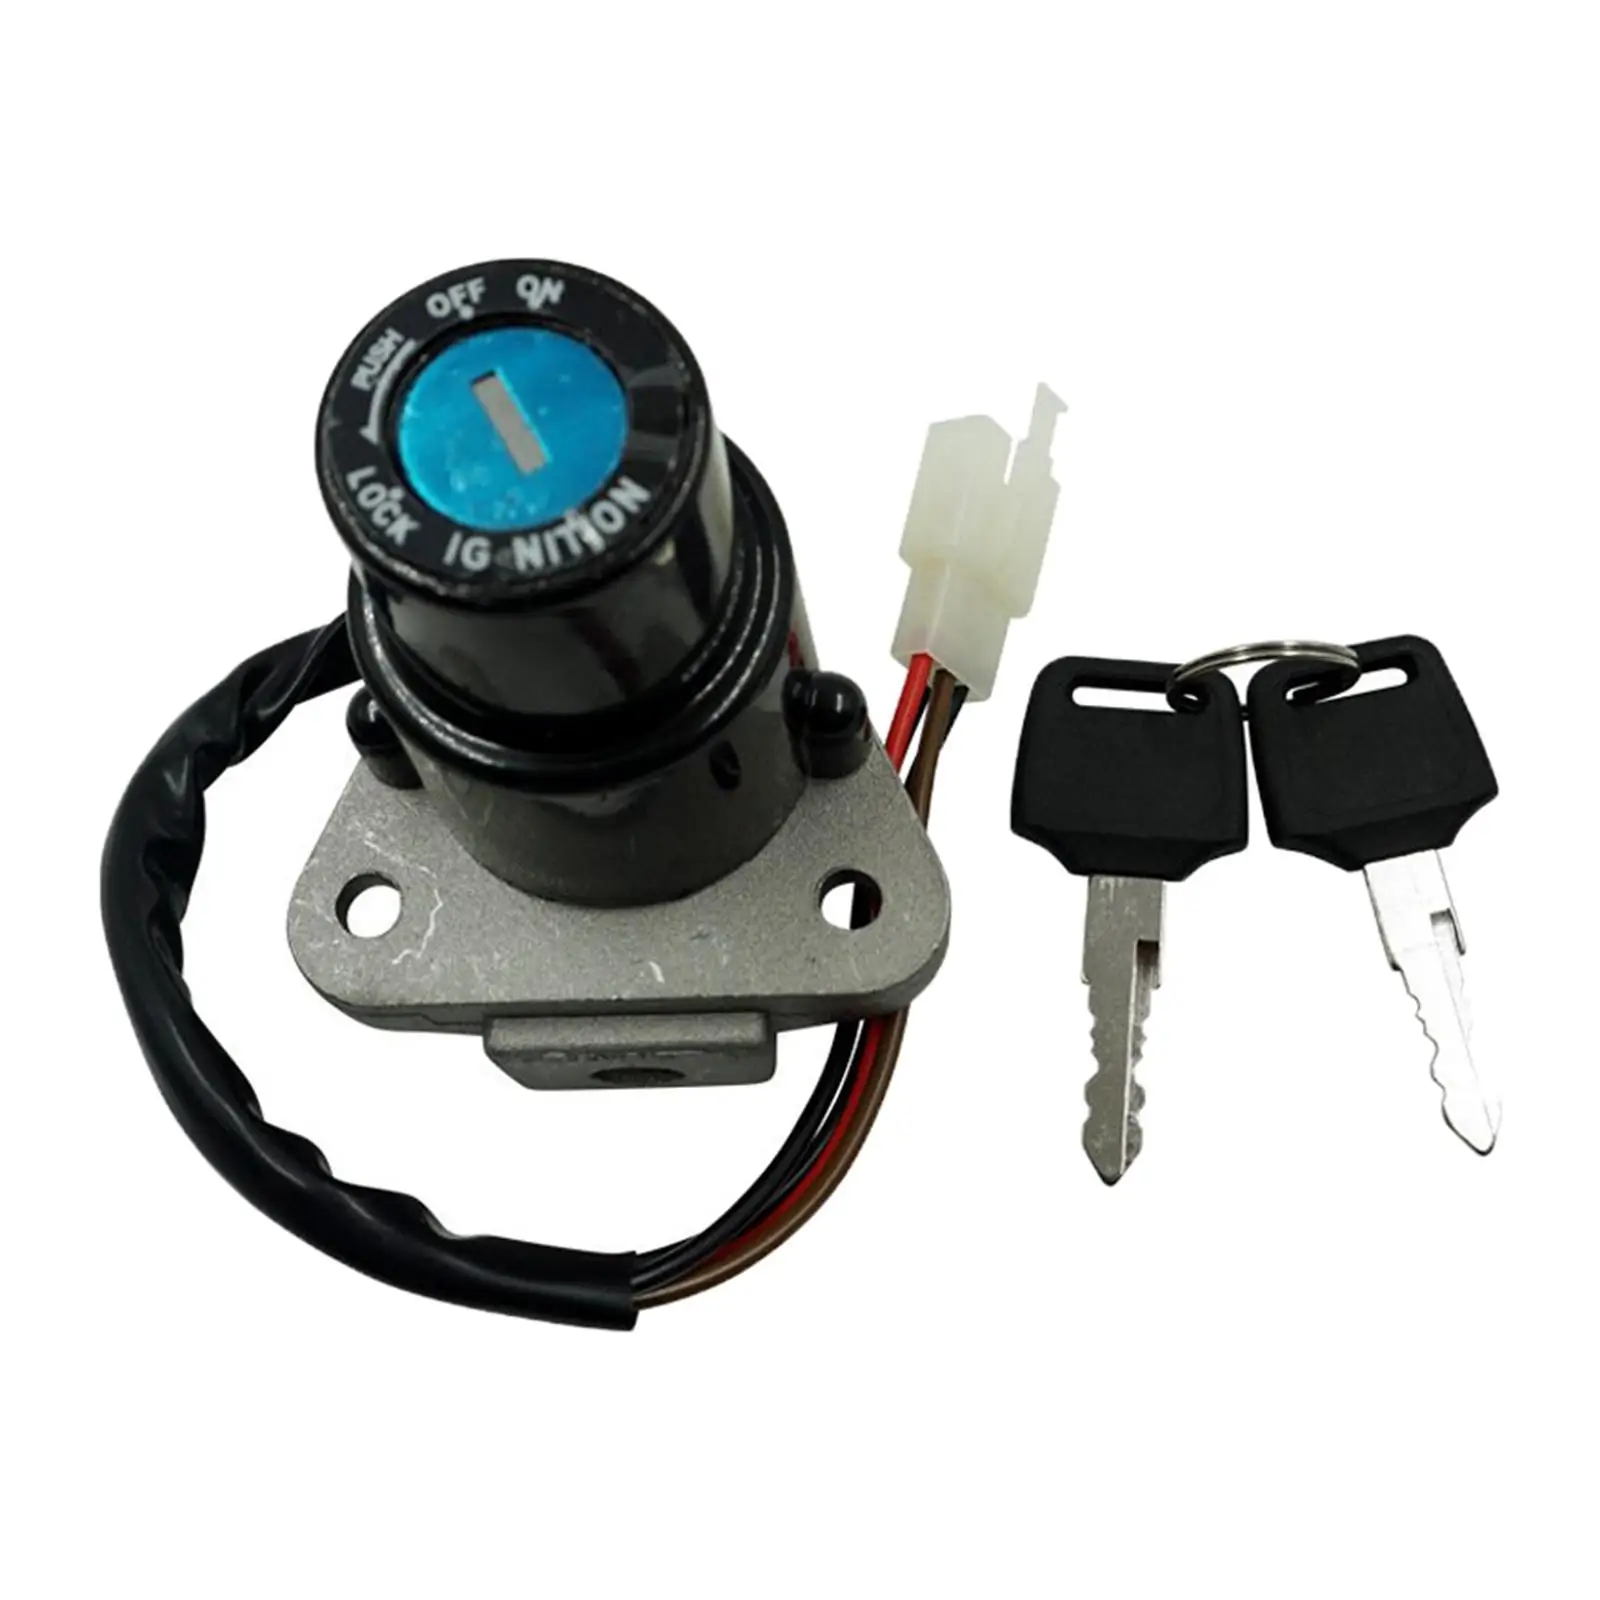 

Motorbike Ignition Switch Key Replace Electric Door Lock Fit for Yamaha DT125 TW200 Tzr250 XT225 TW225